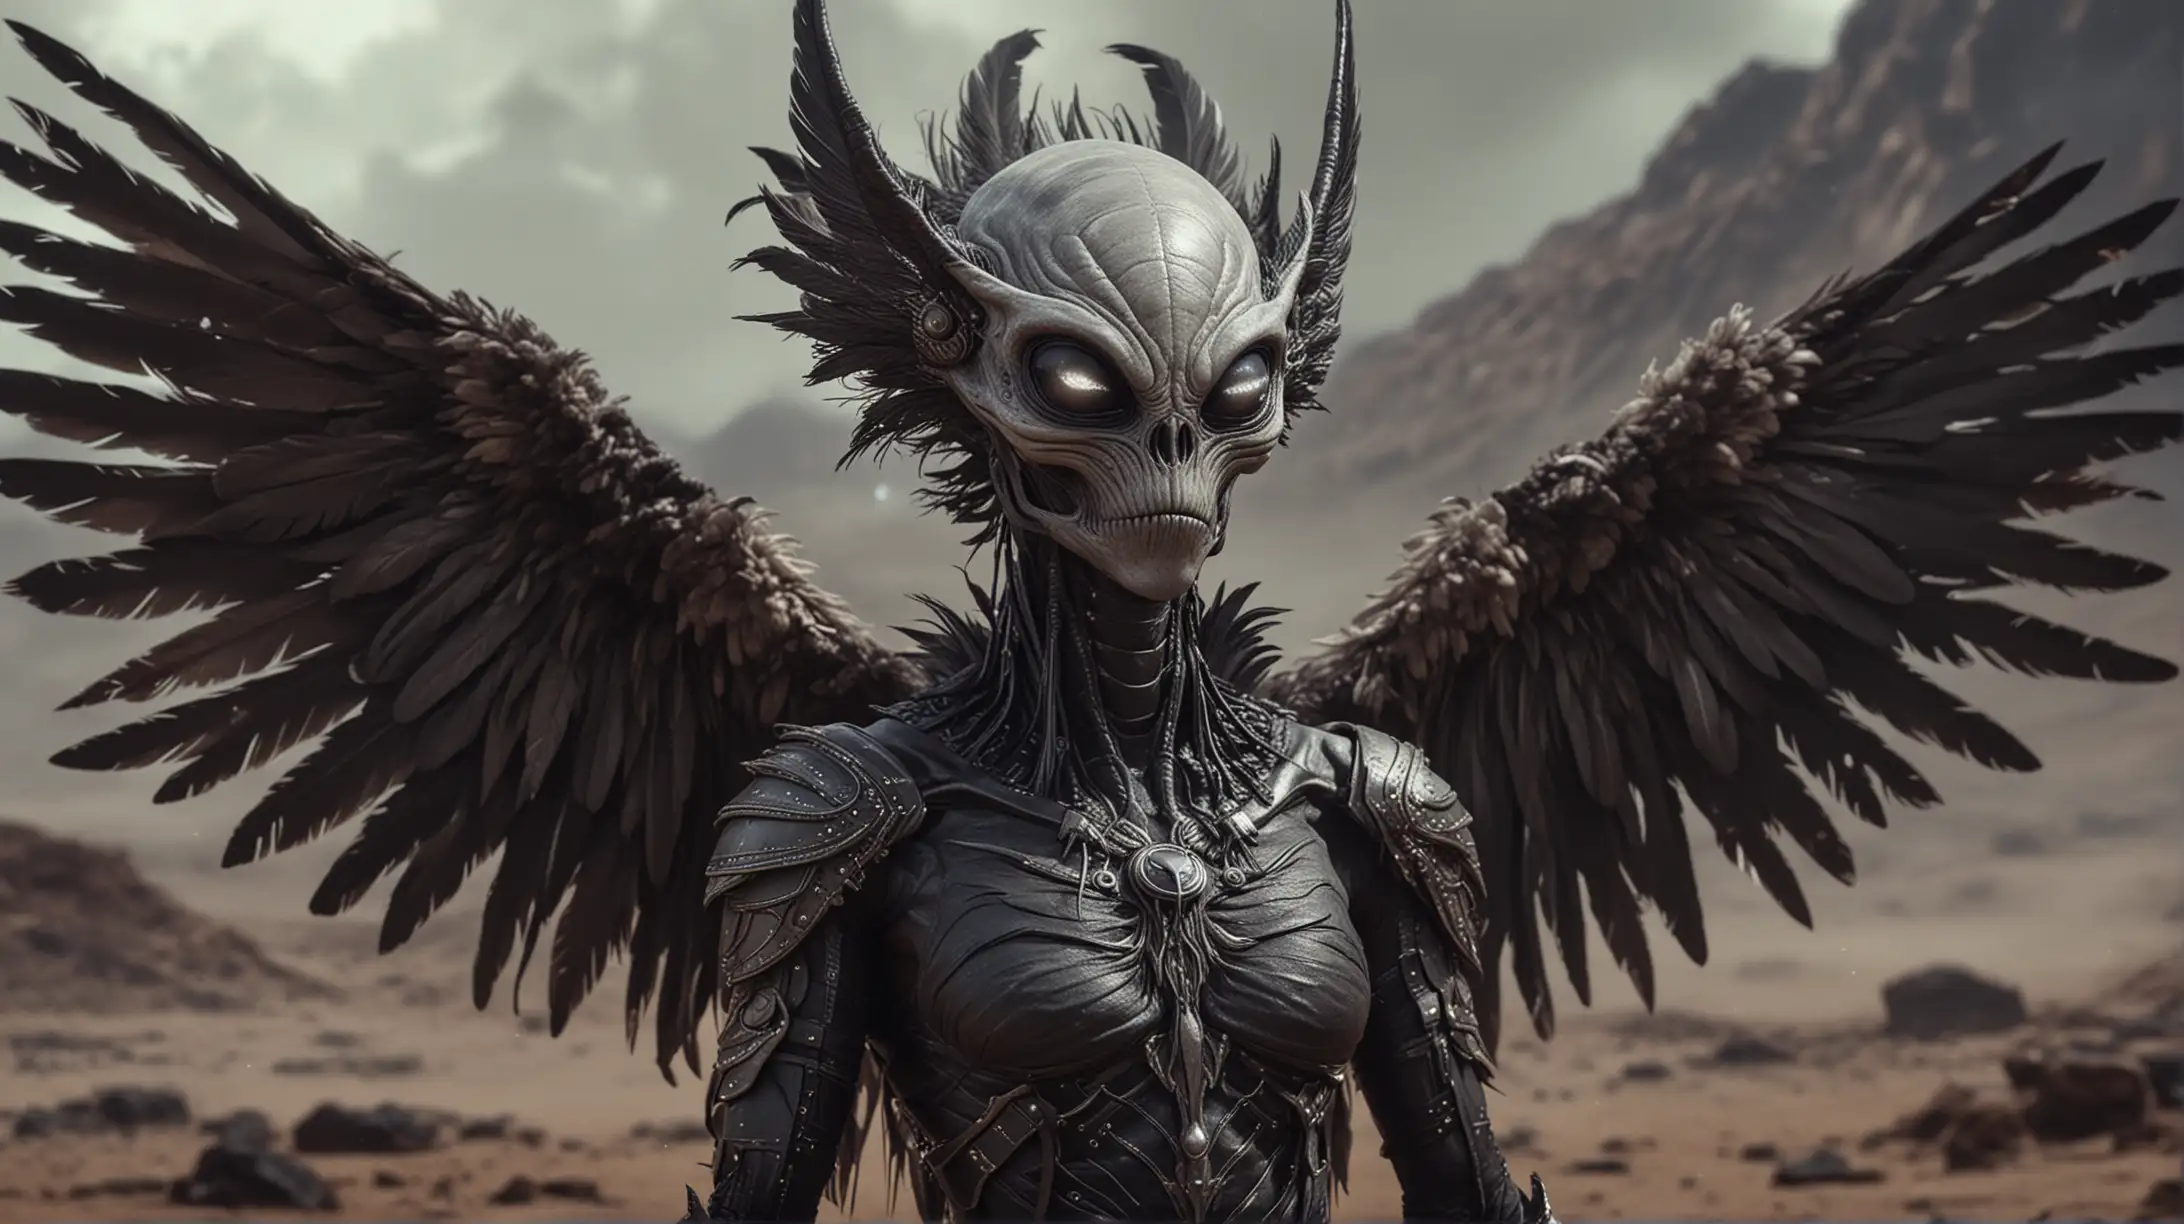 Mystical Feathered Alien with Black Wings on an Alien World